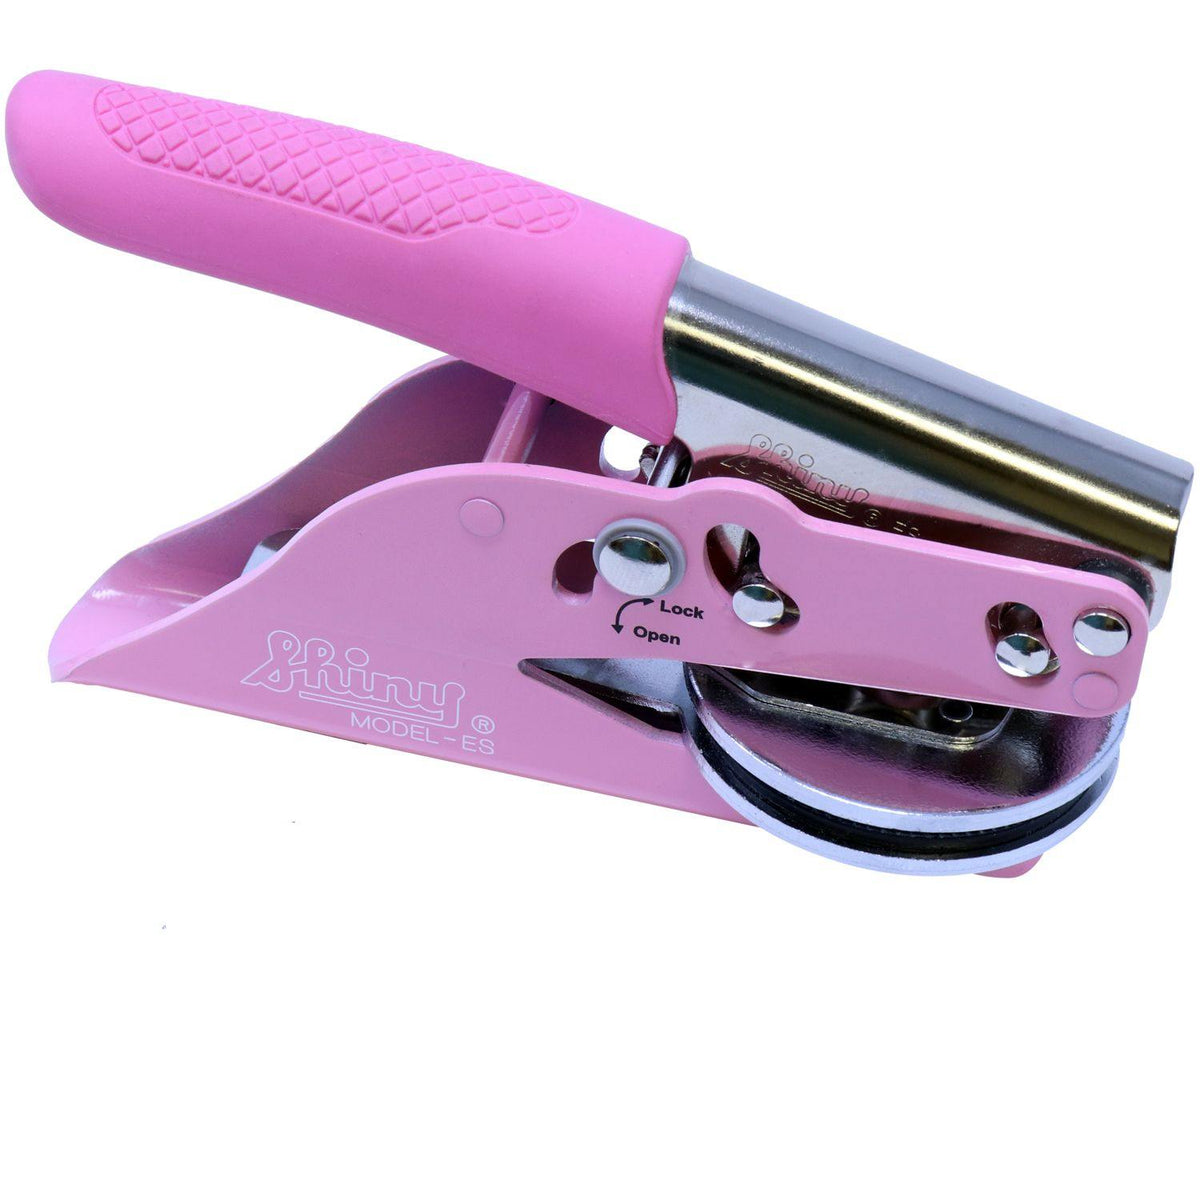 Professional Pink Seal Embosser - Engineer Seal Stamps - Embosser Type_Handheld, Embosser Type_Soft Seal, Type of Use_Professional